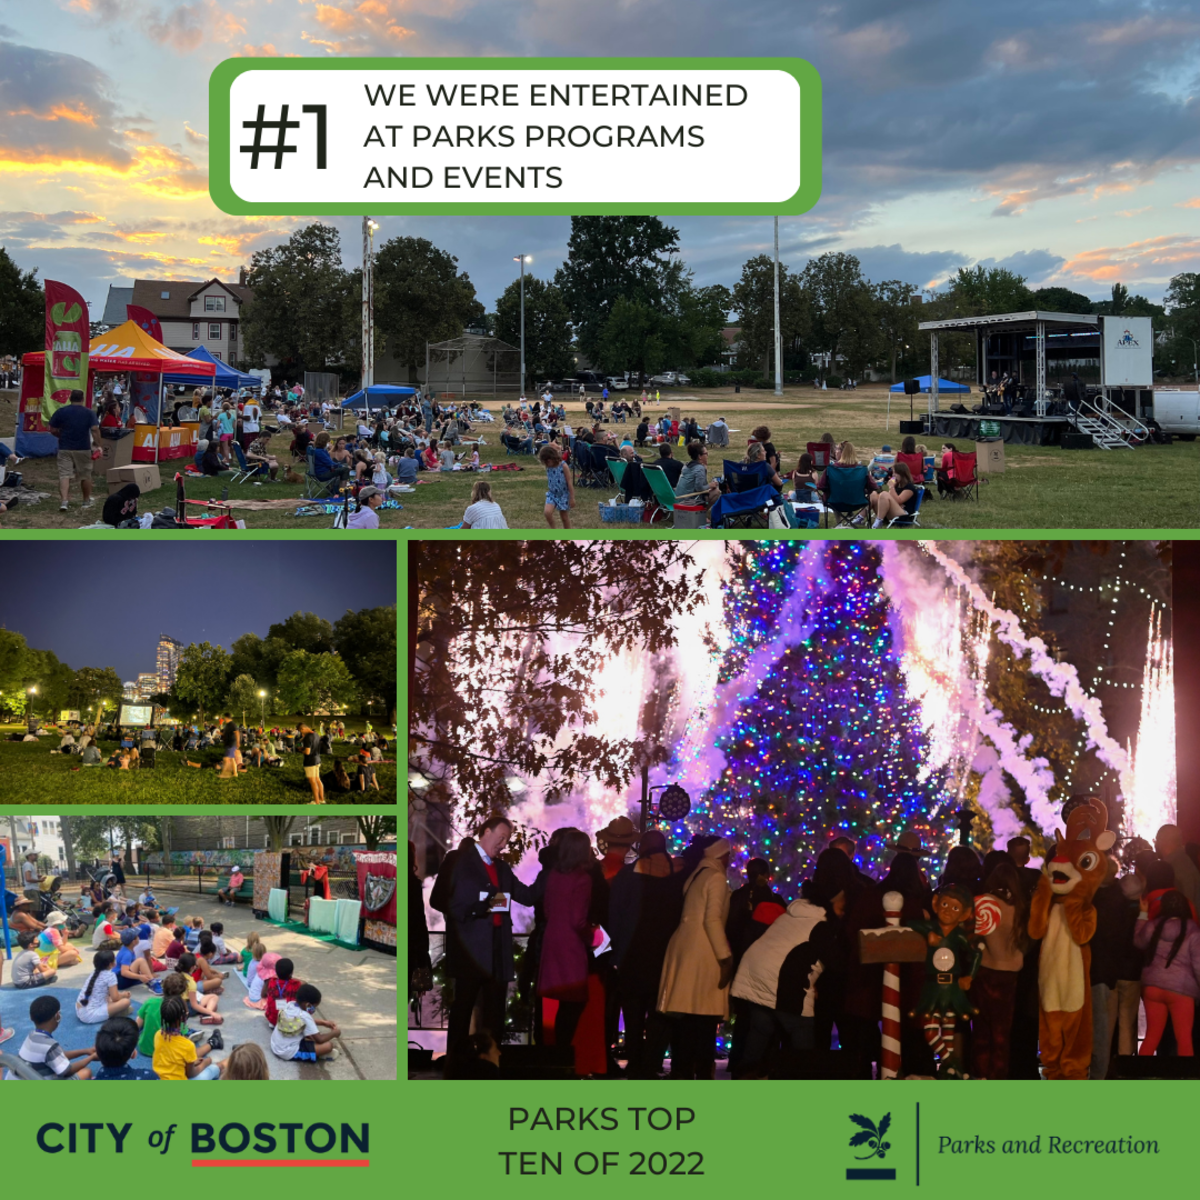 Parks top ten of 2022 #1 We were entertained at parks programs and events. Grid - Neighborhood concert in a park, movie night, puppet show, and the Christmas tree being lit.